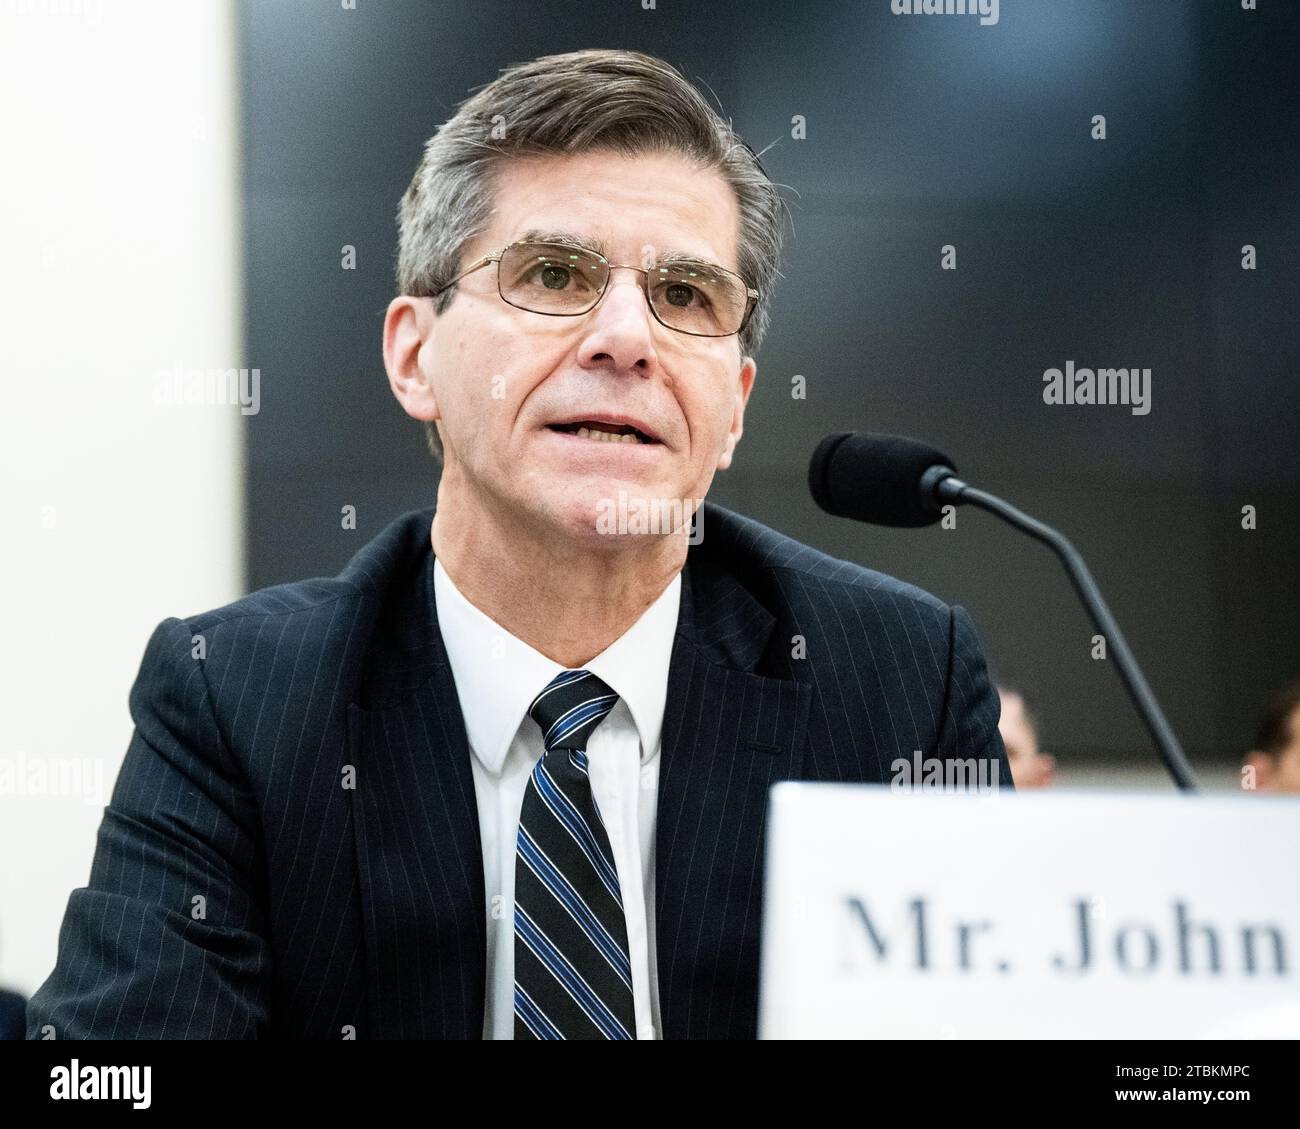 Washington, United States. 07th Dec, 2023. John Hill, Deputy Assistant Secretary of Defense for Space and Missile Defense Policy, speaking at a hearing of the House Armed Services Committee's Strategic Forces Subcommittee at the U.S. Capitol. Credit: SOPA Images Limited/Alamy Live News Stock Photo